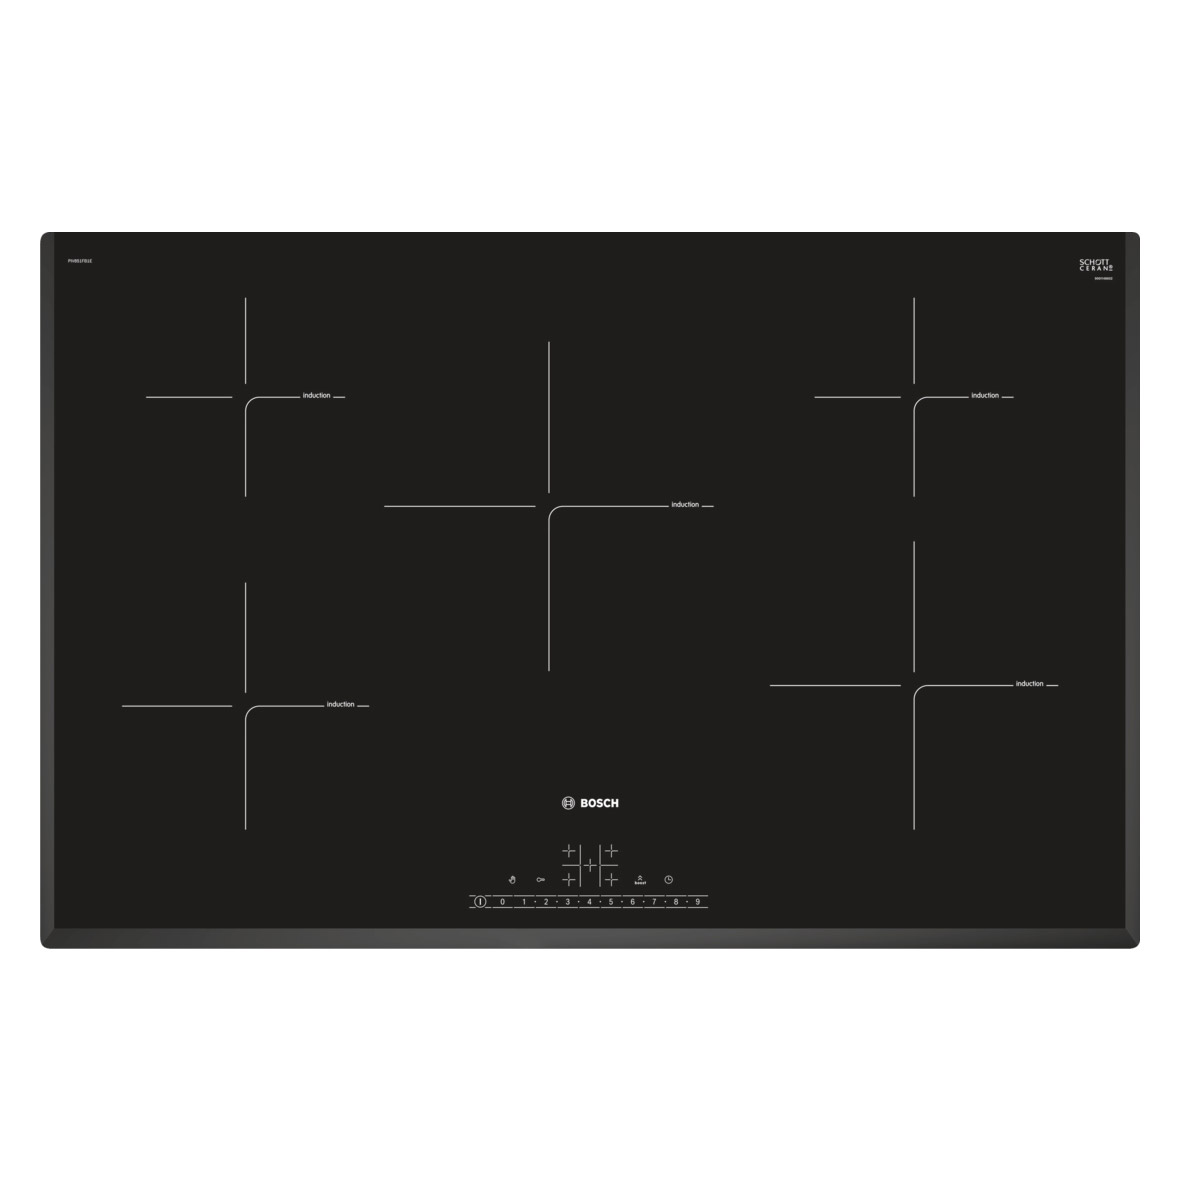 Image of Bosch PIV851FB1E Series 6 80cm 5 Zone Induction Hob in Black Glass